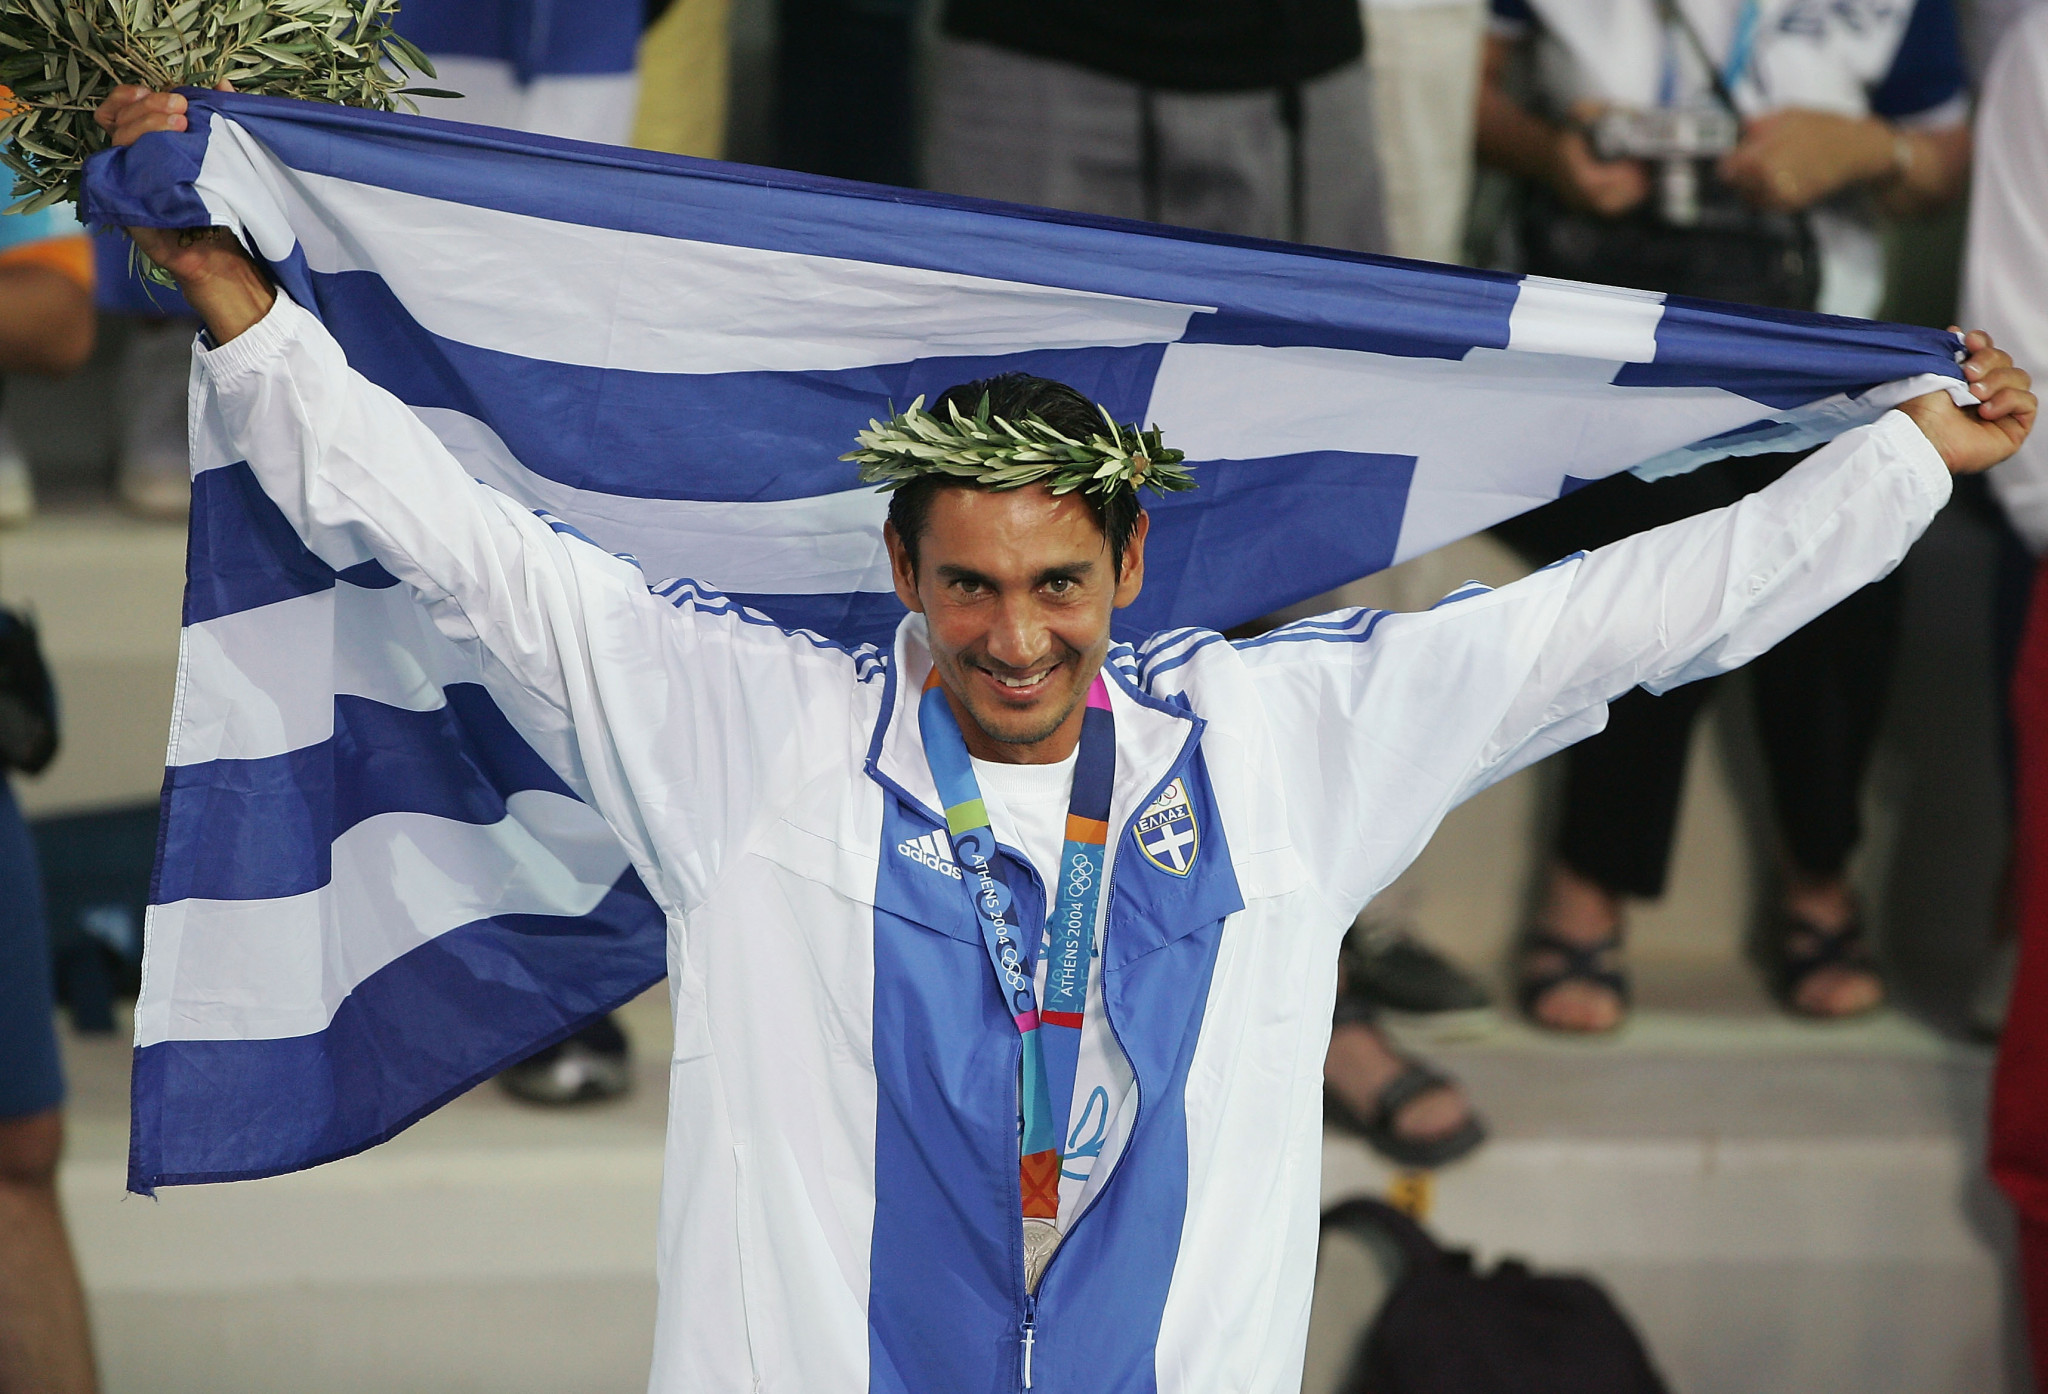 Hellenic Sailing Federation sues Olympic gold medallist over alleged comments